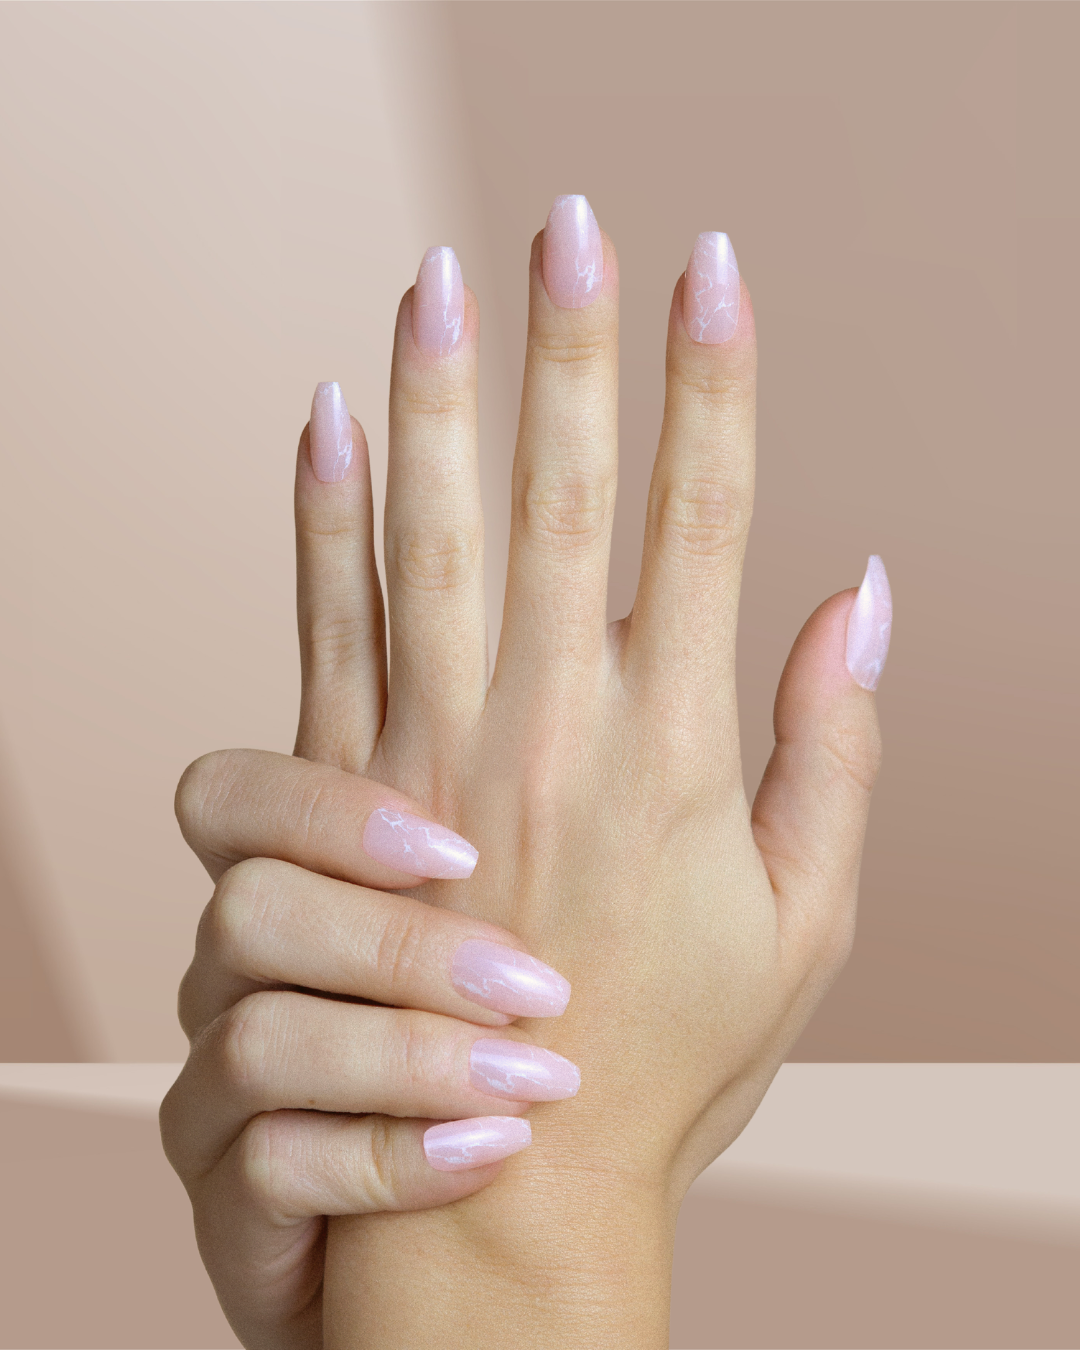 Nailuxe - The modern manicure